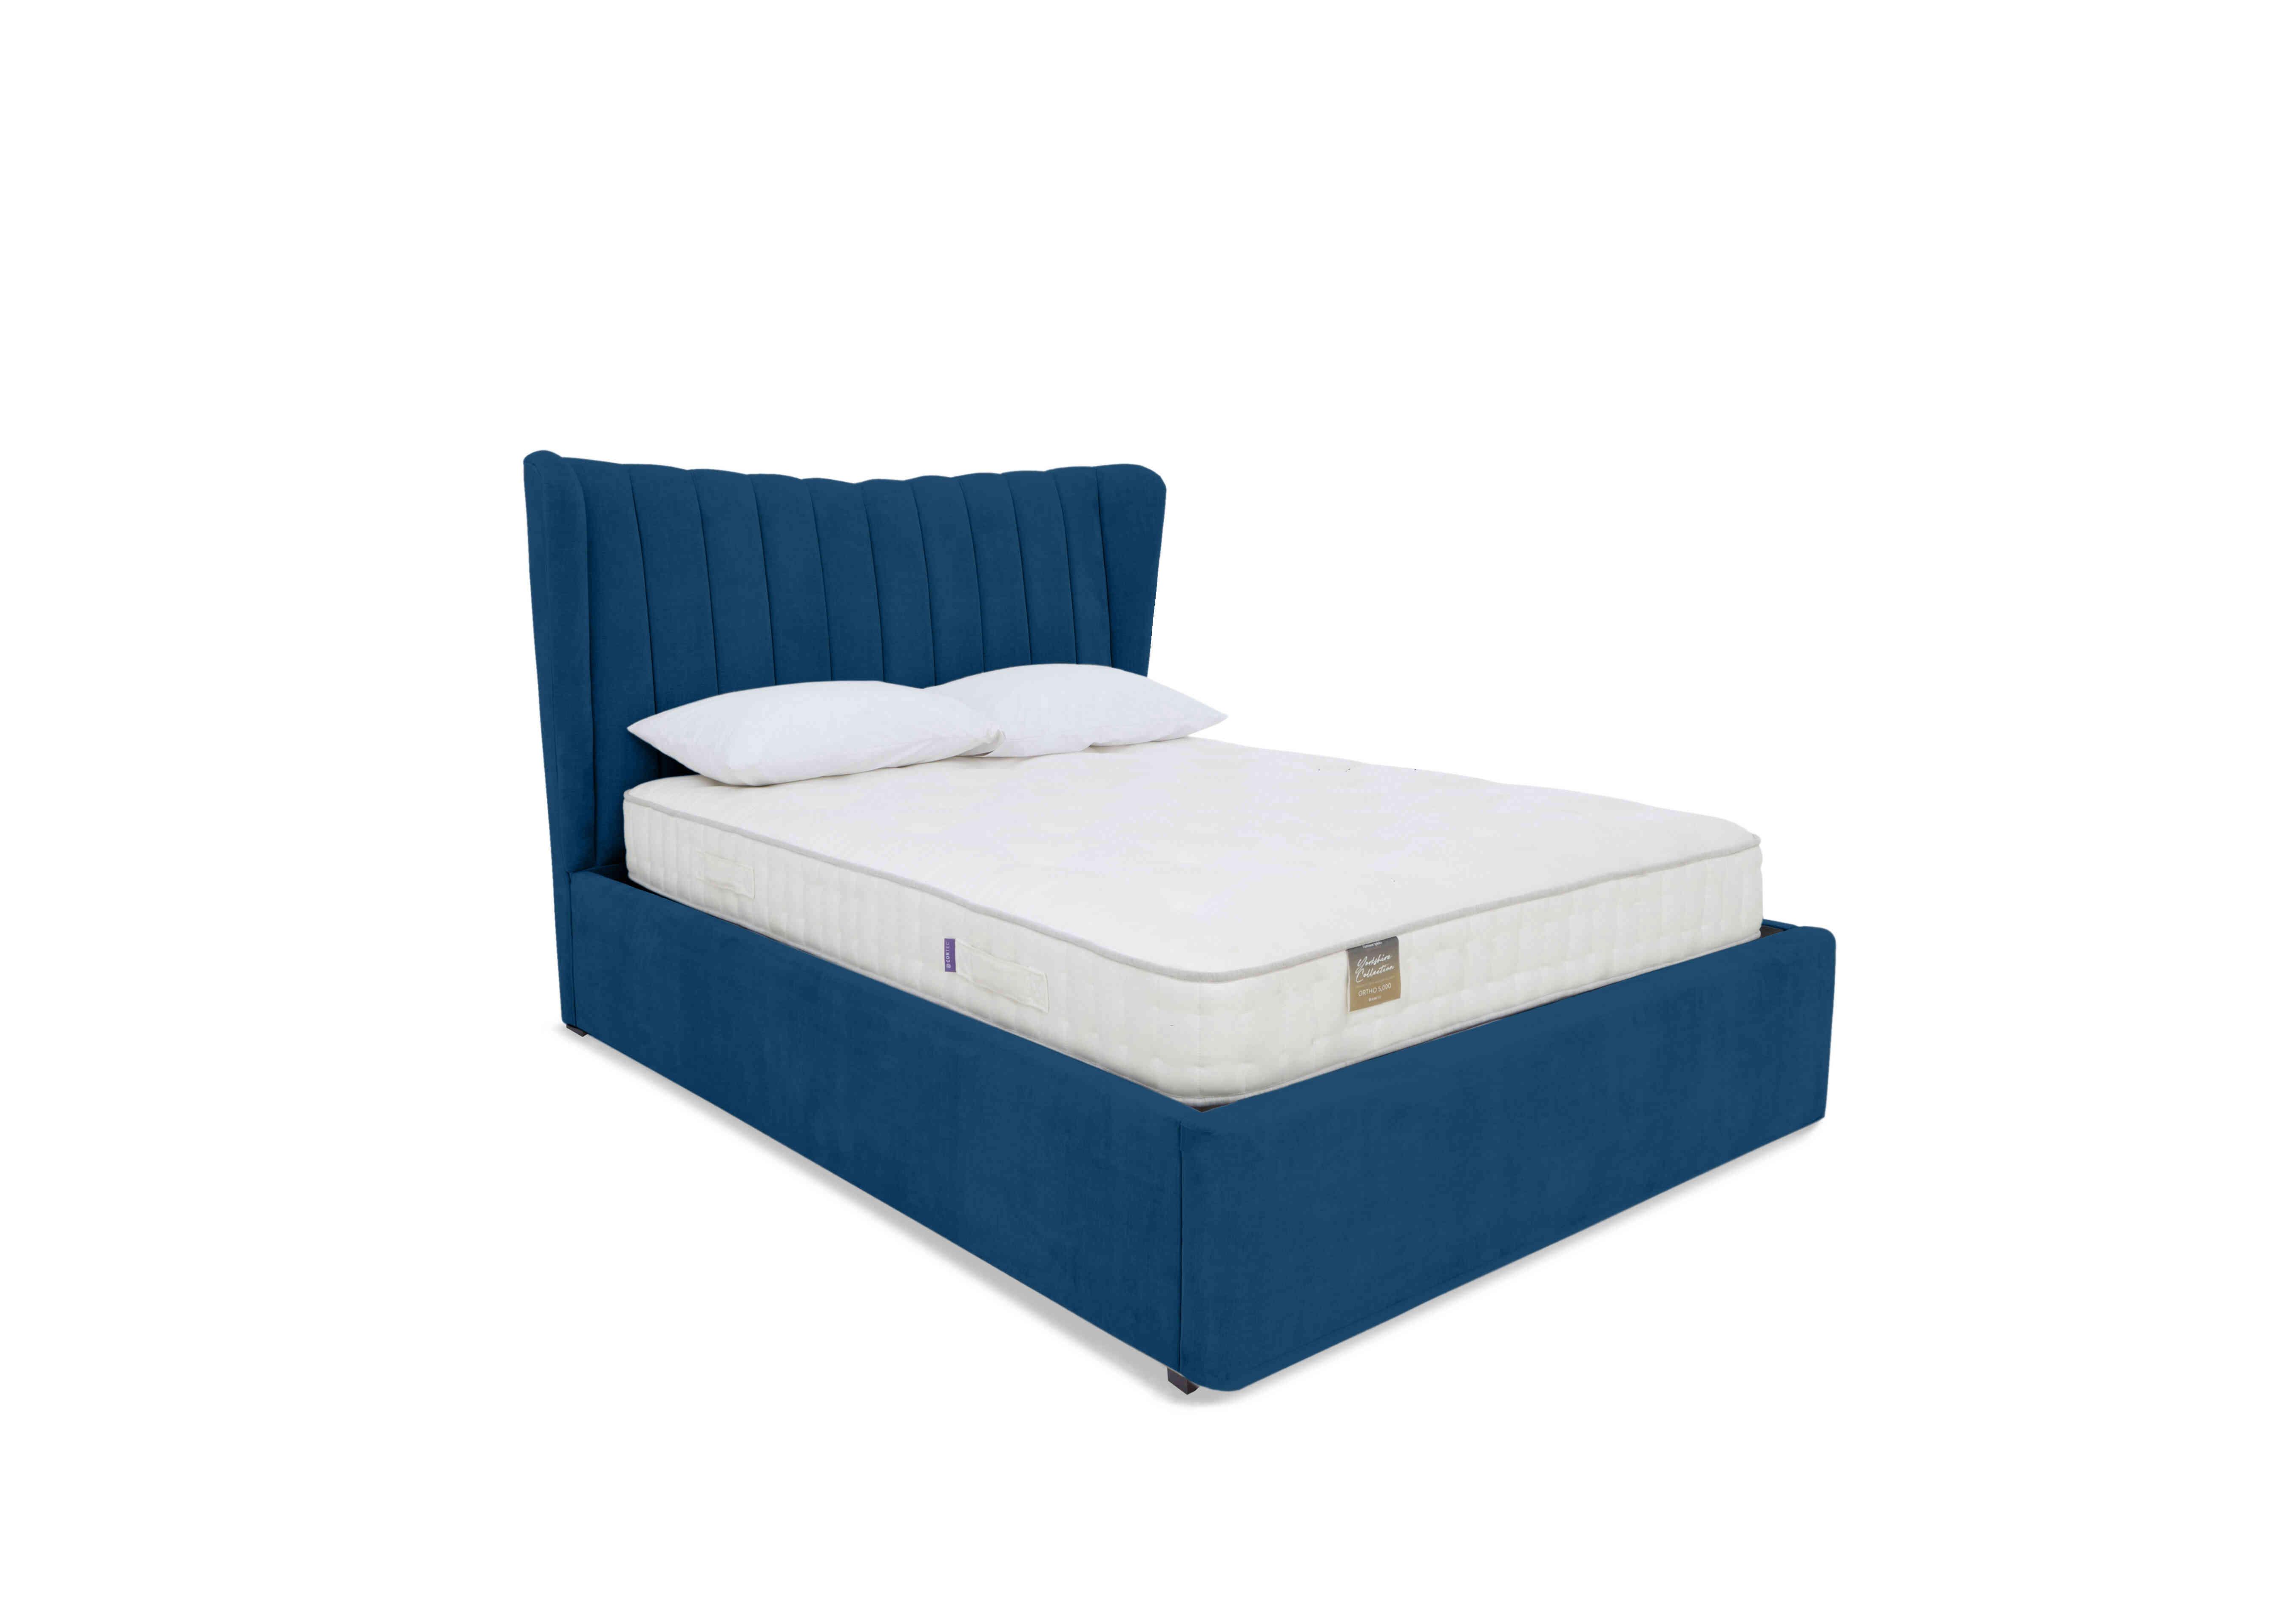 Bourne Ottoman Bed Frame in Plush Pacific on Furniture Village